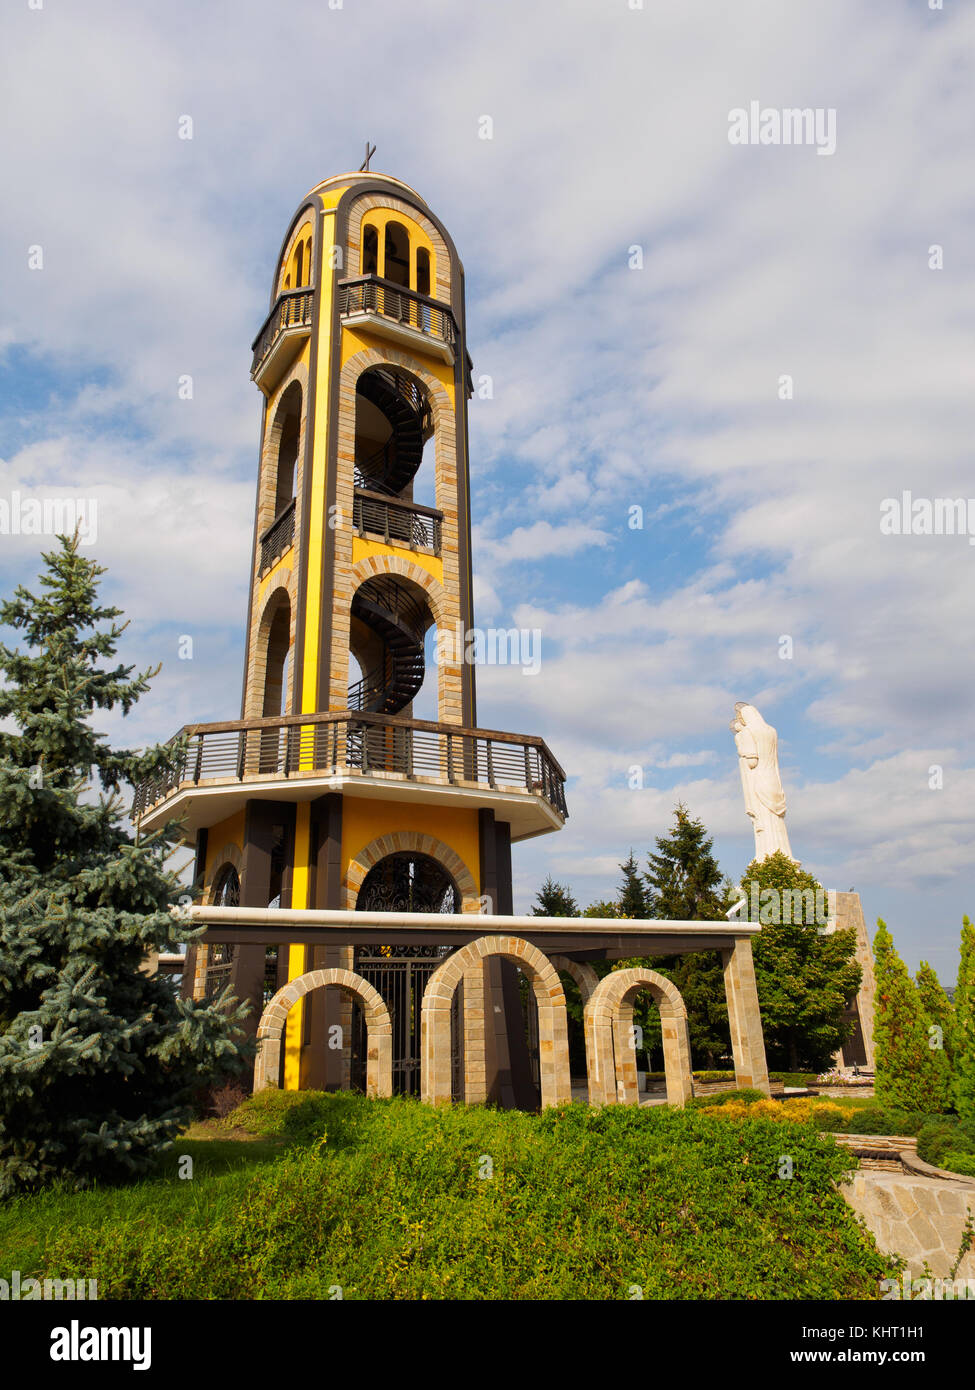 The bell tower in the town of Haskovo, Bulgaria. Stock Photo